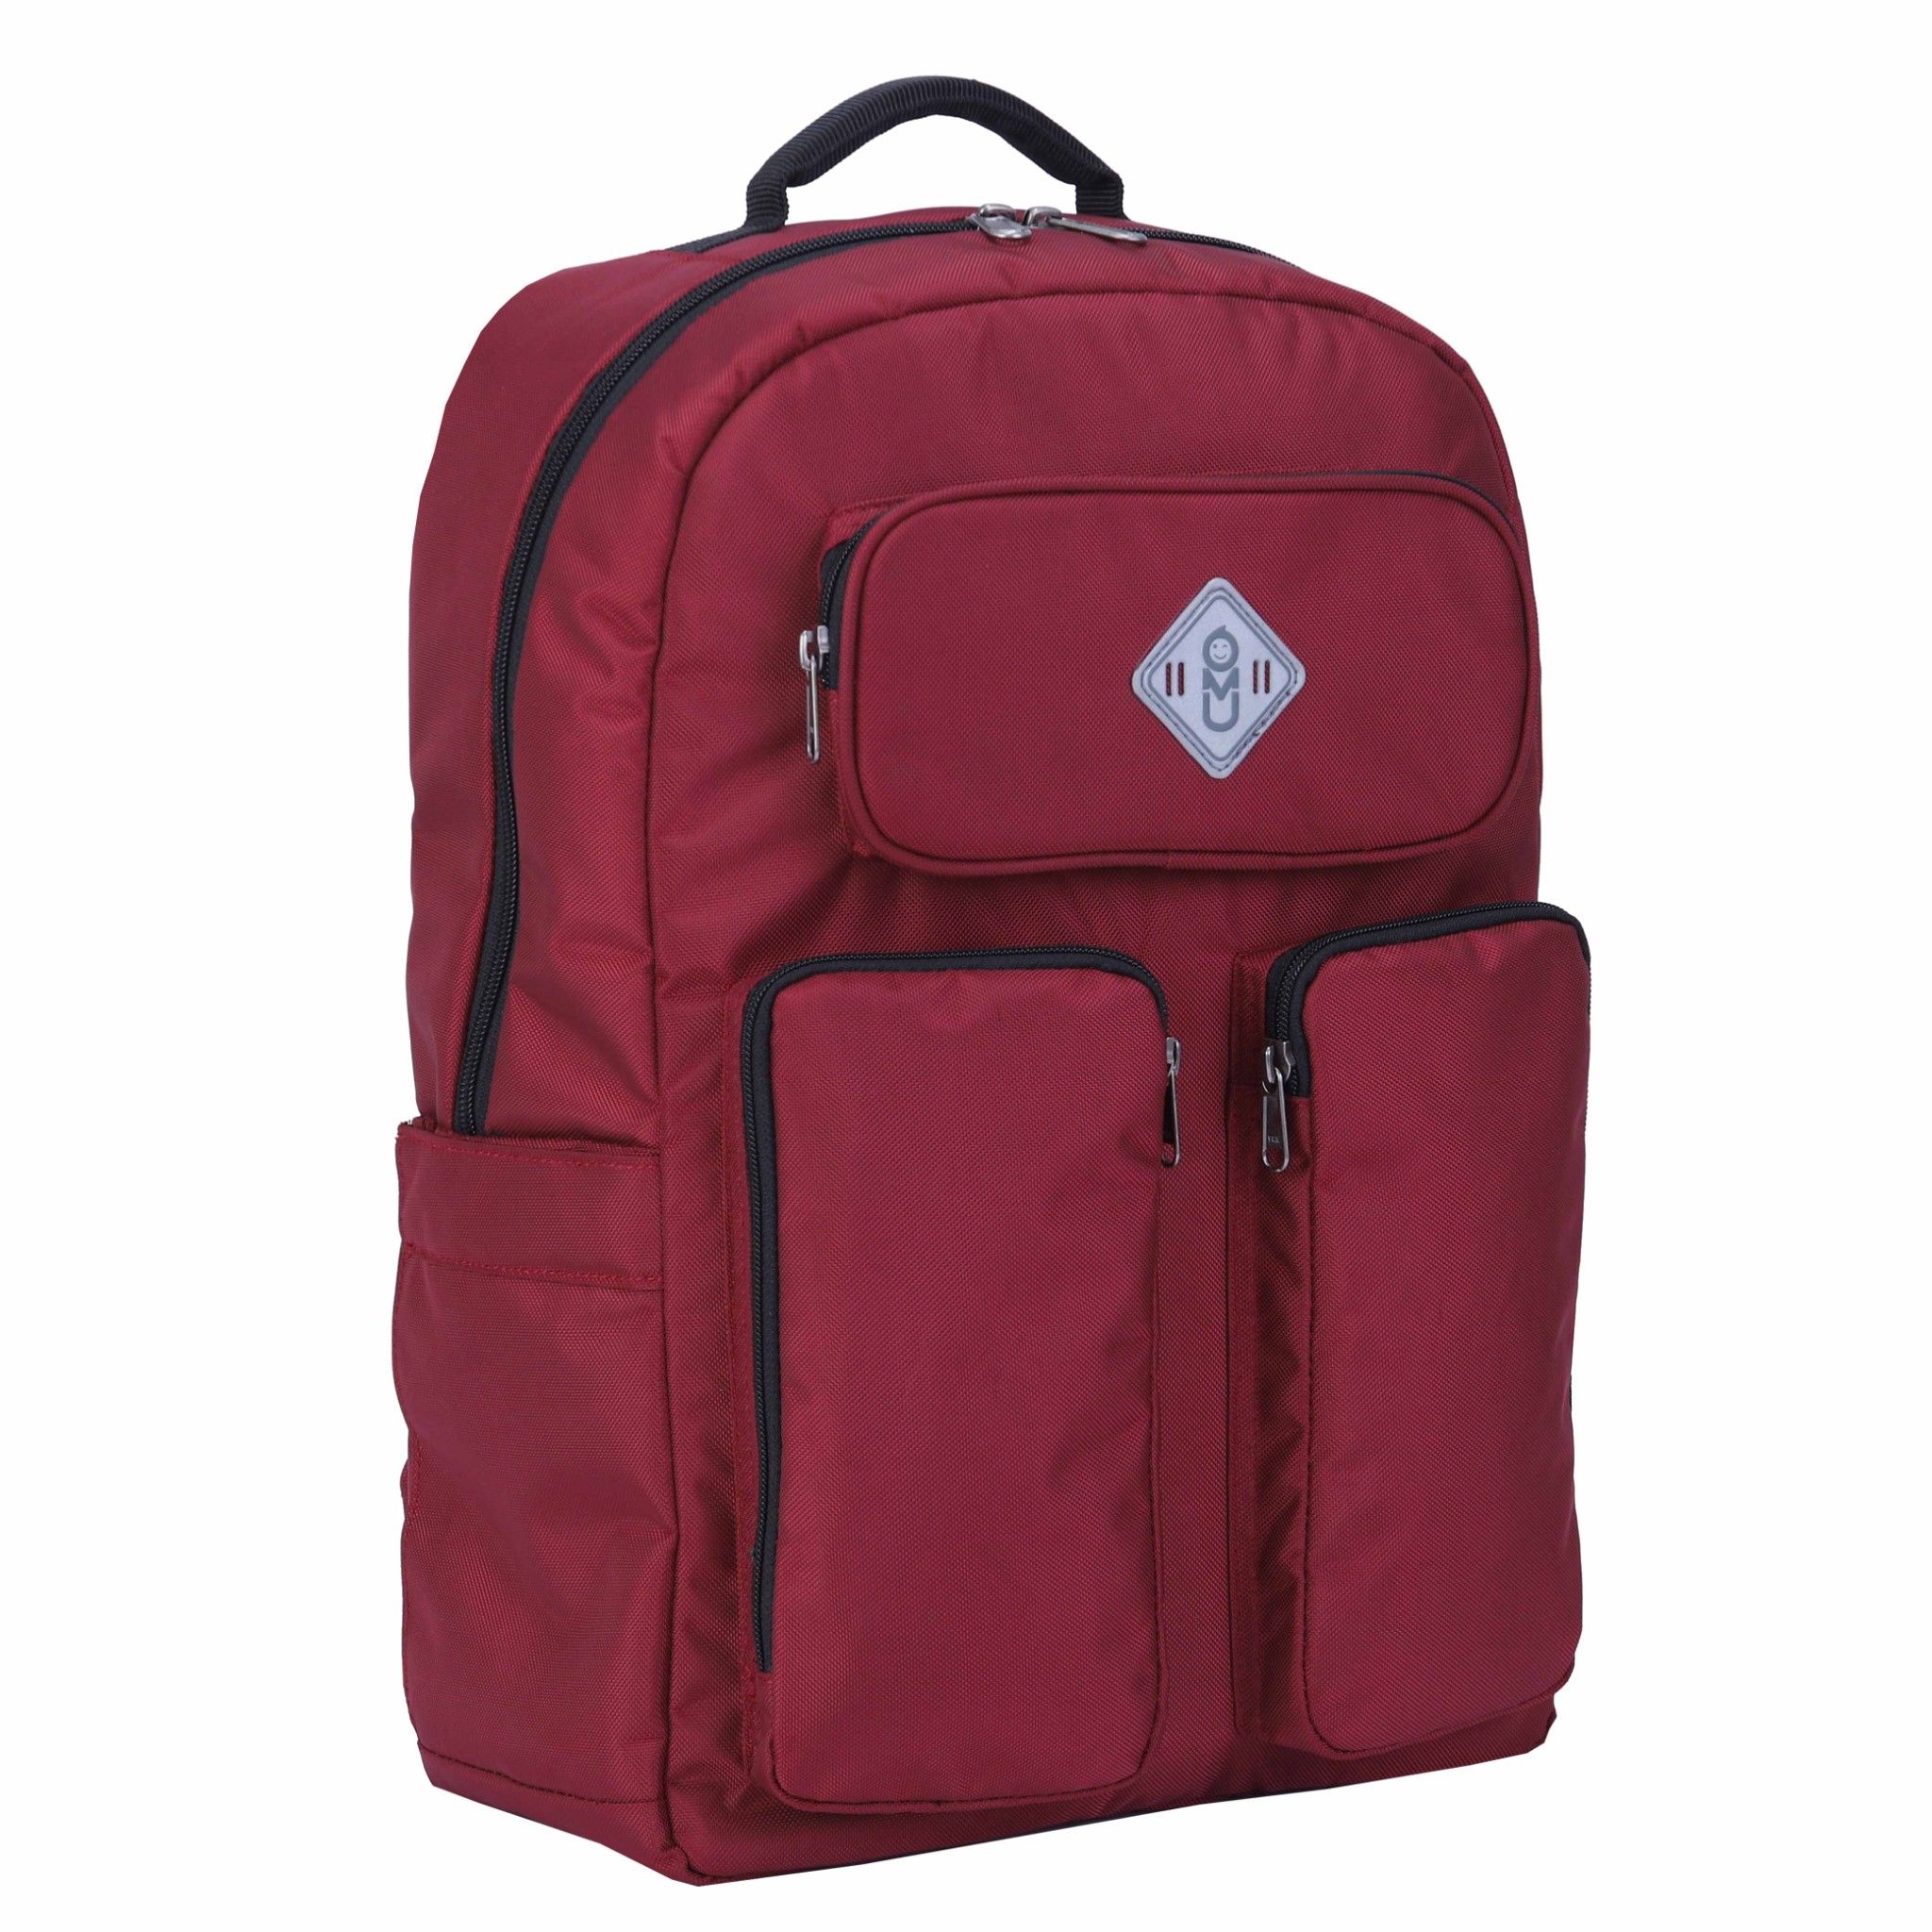  Balo Laptop UMO HUNKY D.Red BackPack 